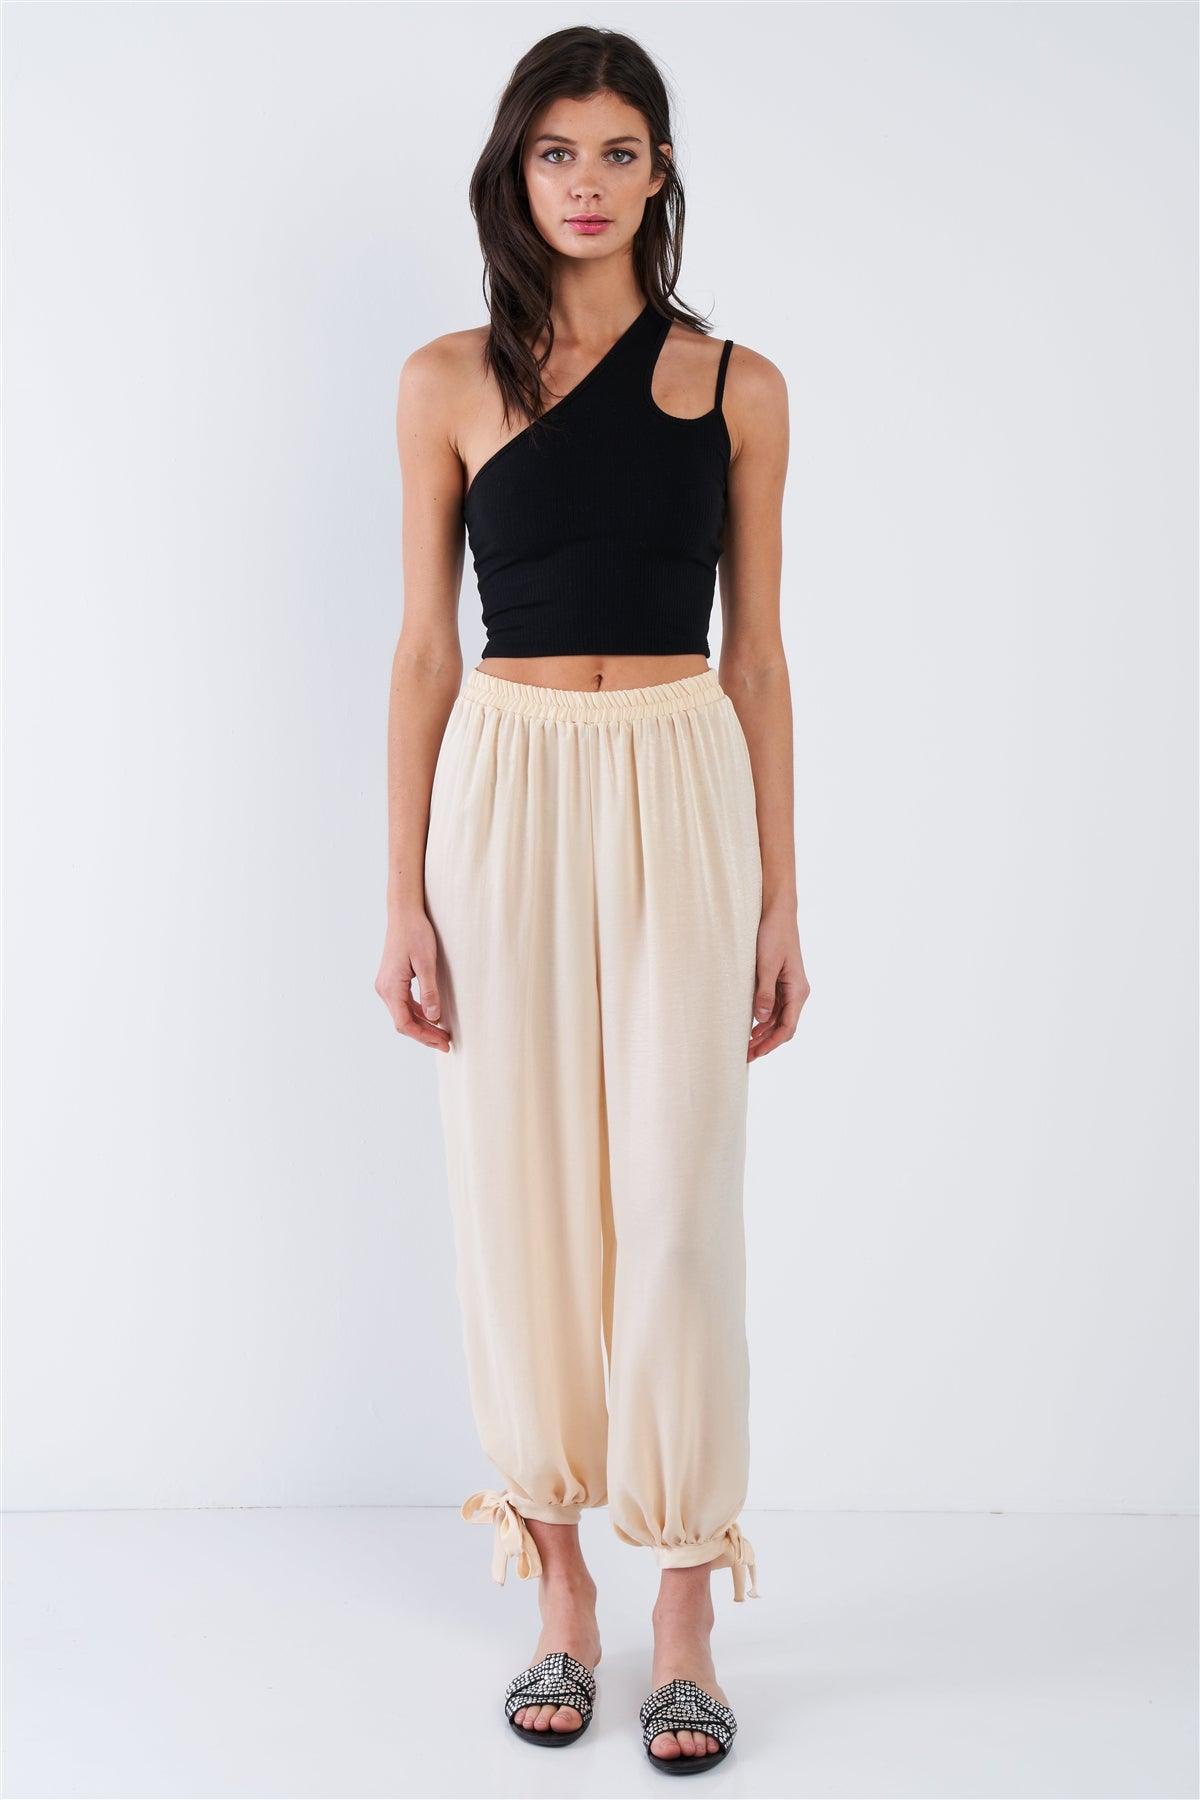 Silk Champagne Yellow Ankle Cut Out Semi-Sheer Jogger Pants  /1-1-2-1